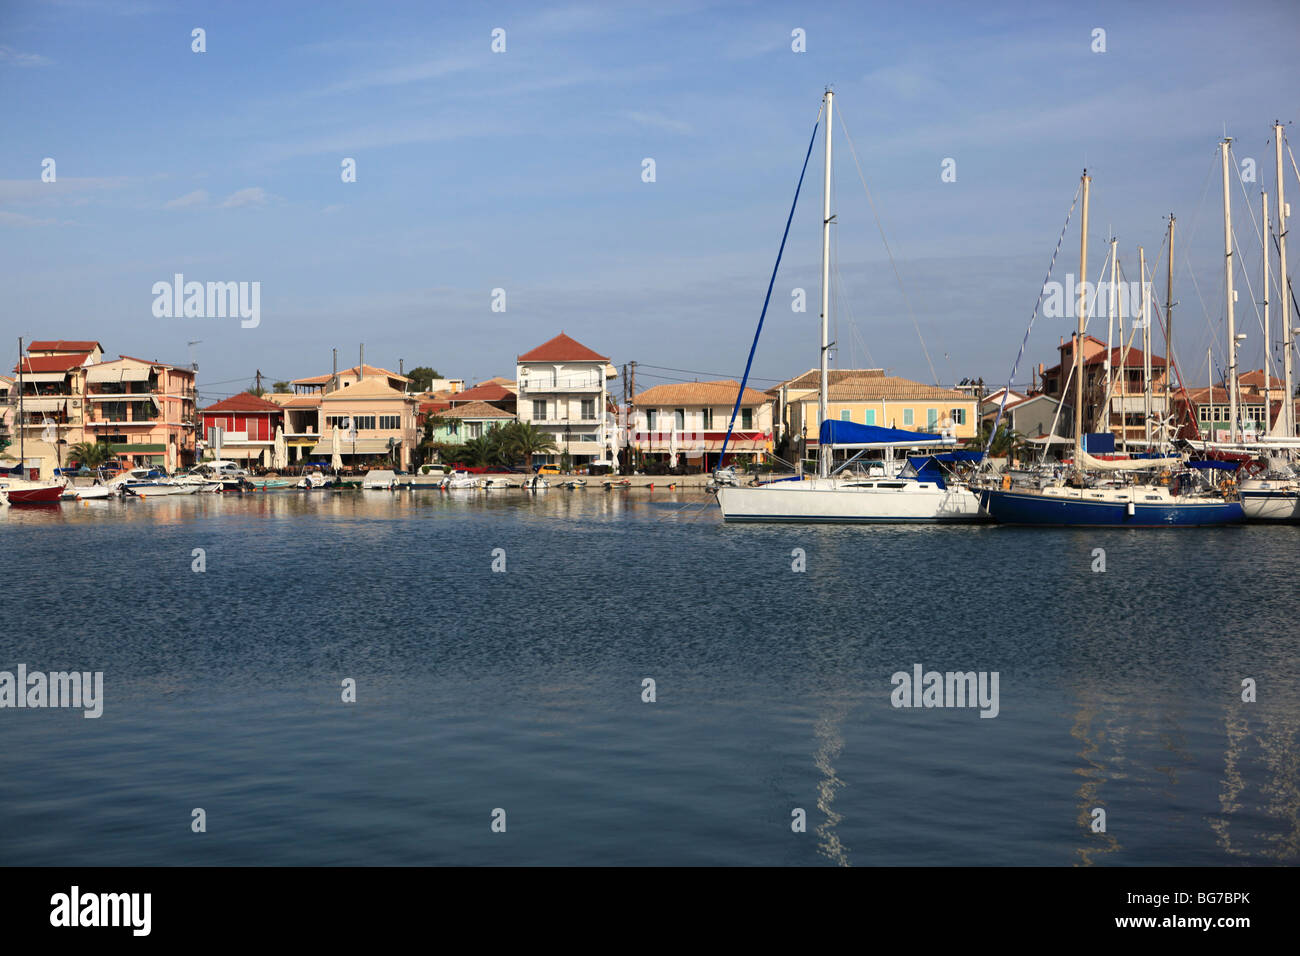 View across the harbour wall towards the town of Lefkas on the Greek Ionian Island of Lefkas Stock Photo